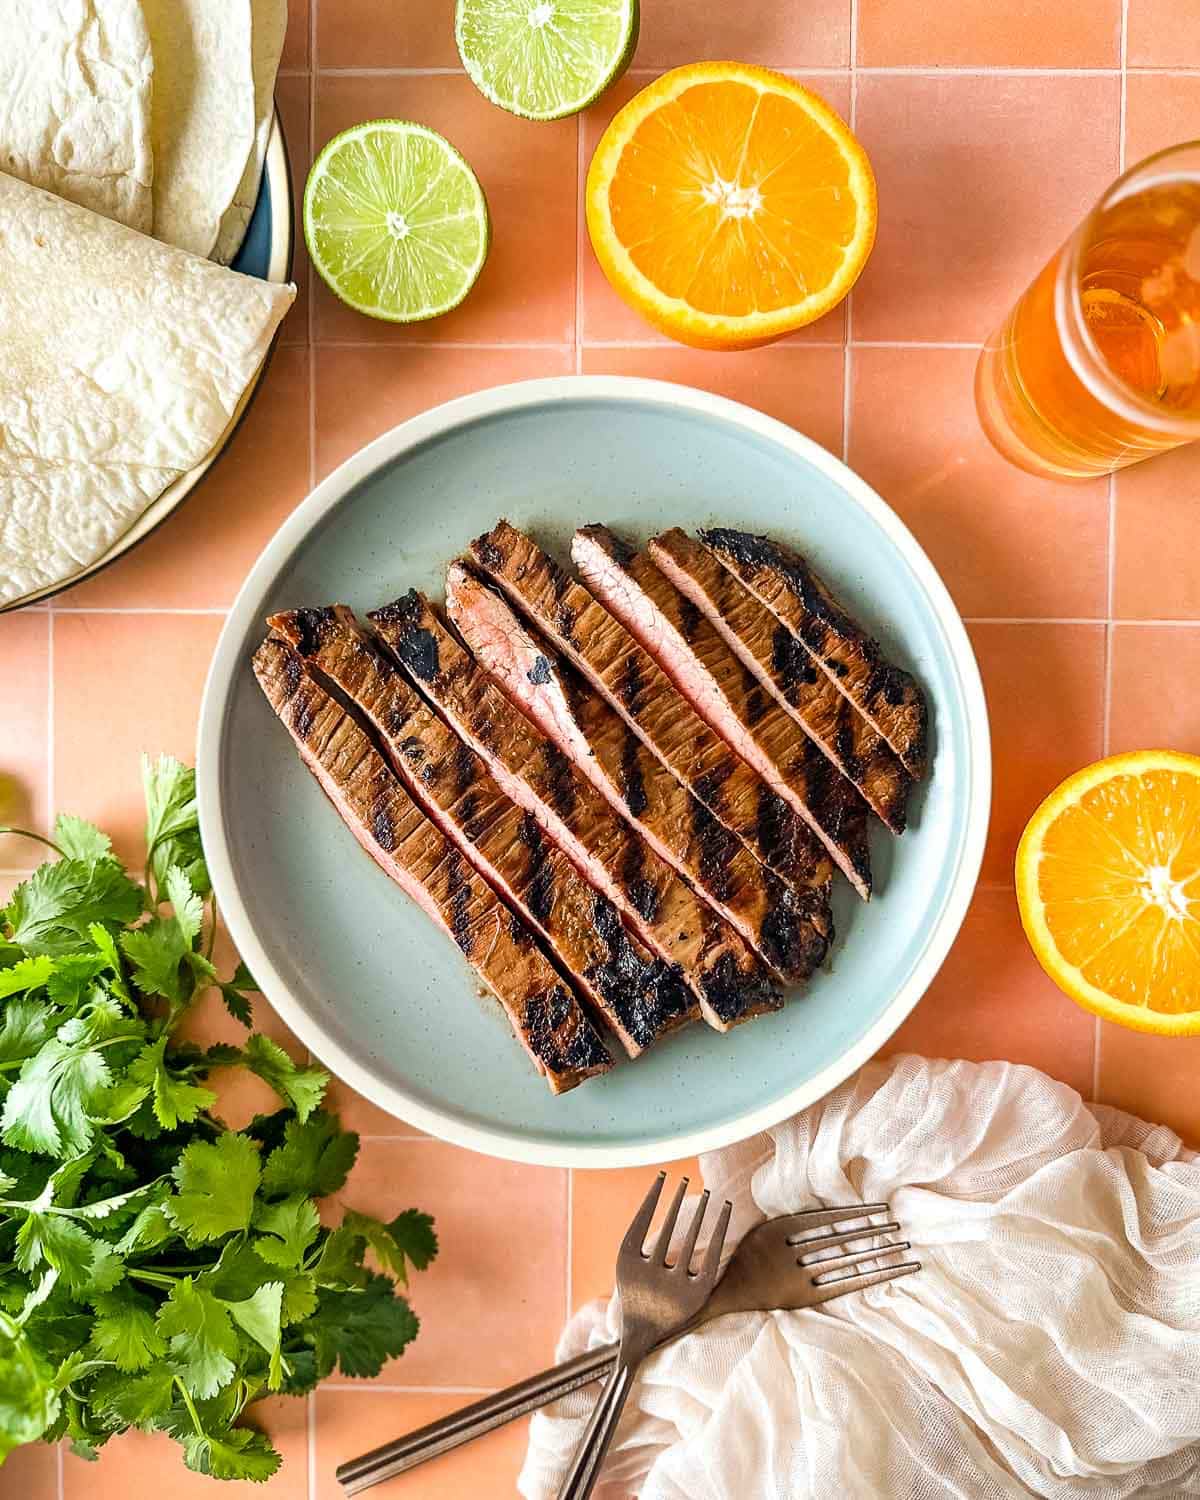 Sliced carne asada sits on a light blue plate surrounded by sliced oranges, limes, a bunch of cilantro, tortillas, and a glass of beer.